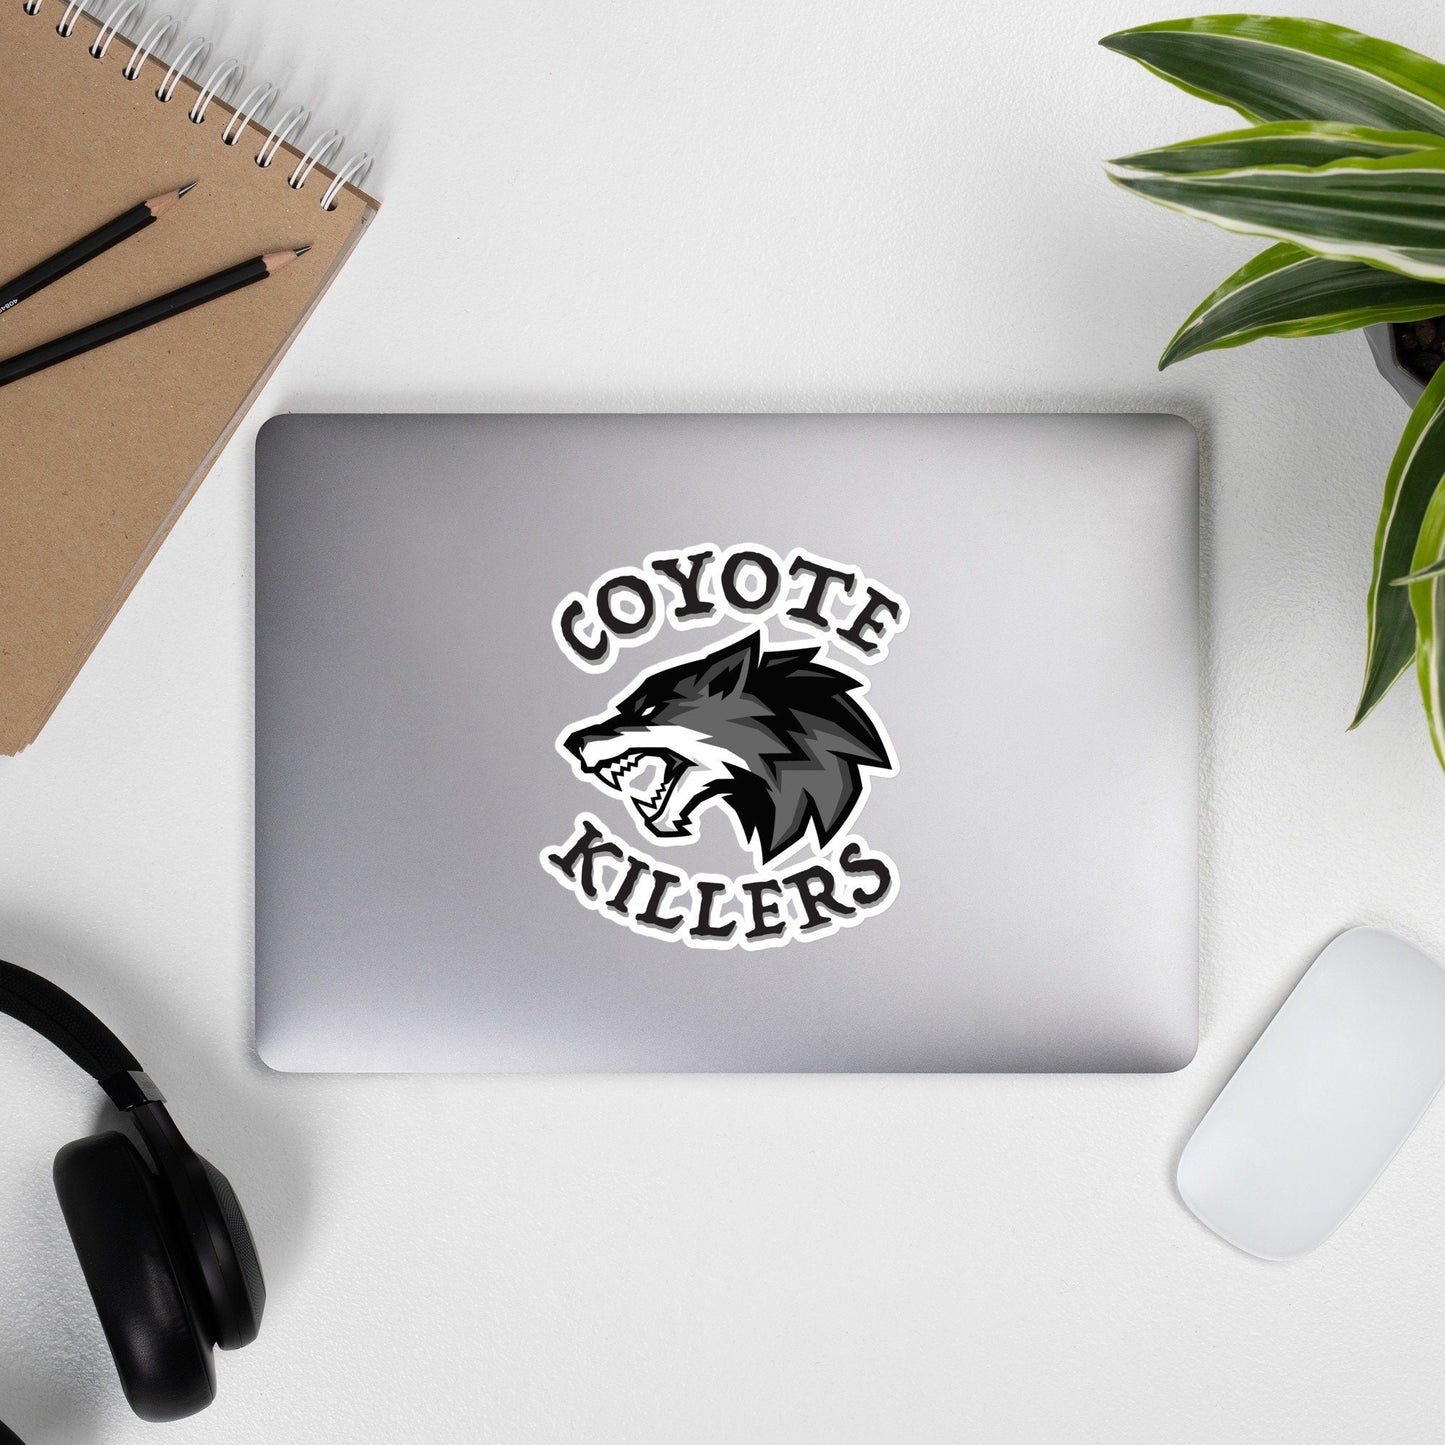 Coyote Killers - Coyote Calling and Hunting Decals Hunter Vinyl Stickers Coyote Shooting Hunters Gift Idea for Outdoor Enthusiasts